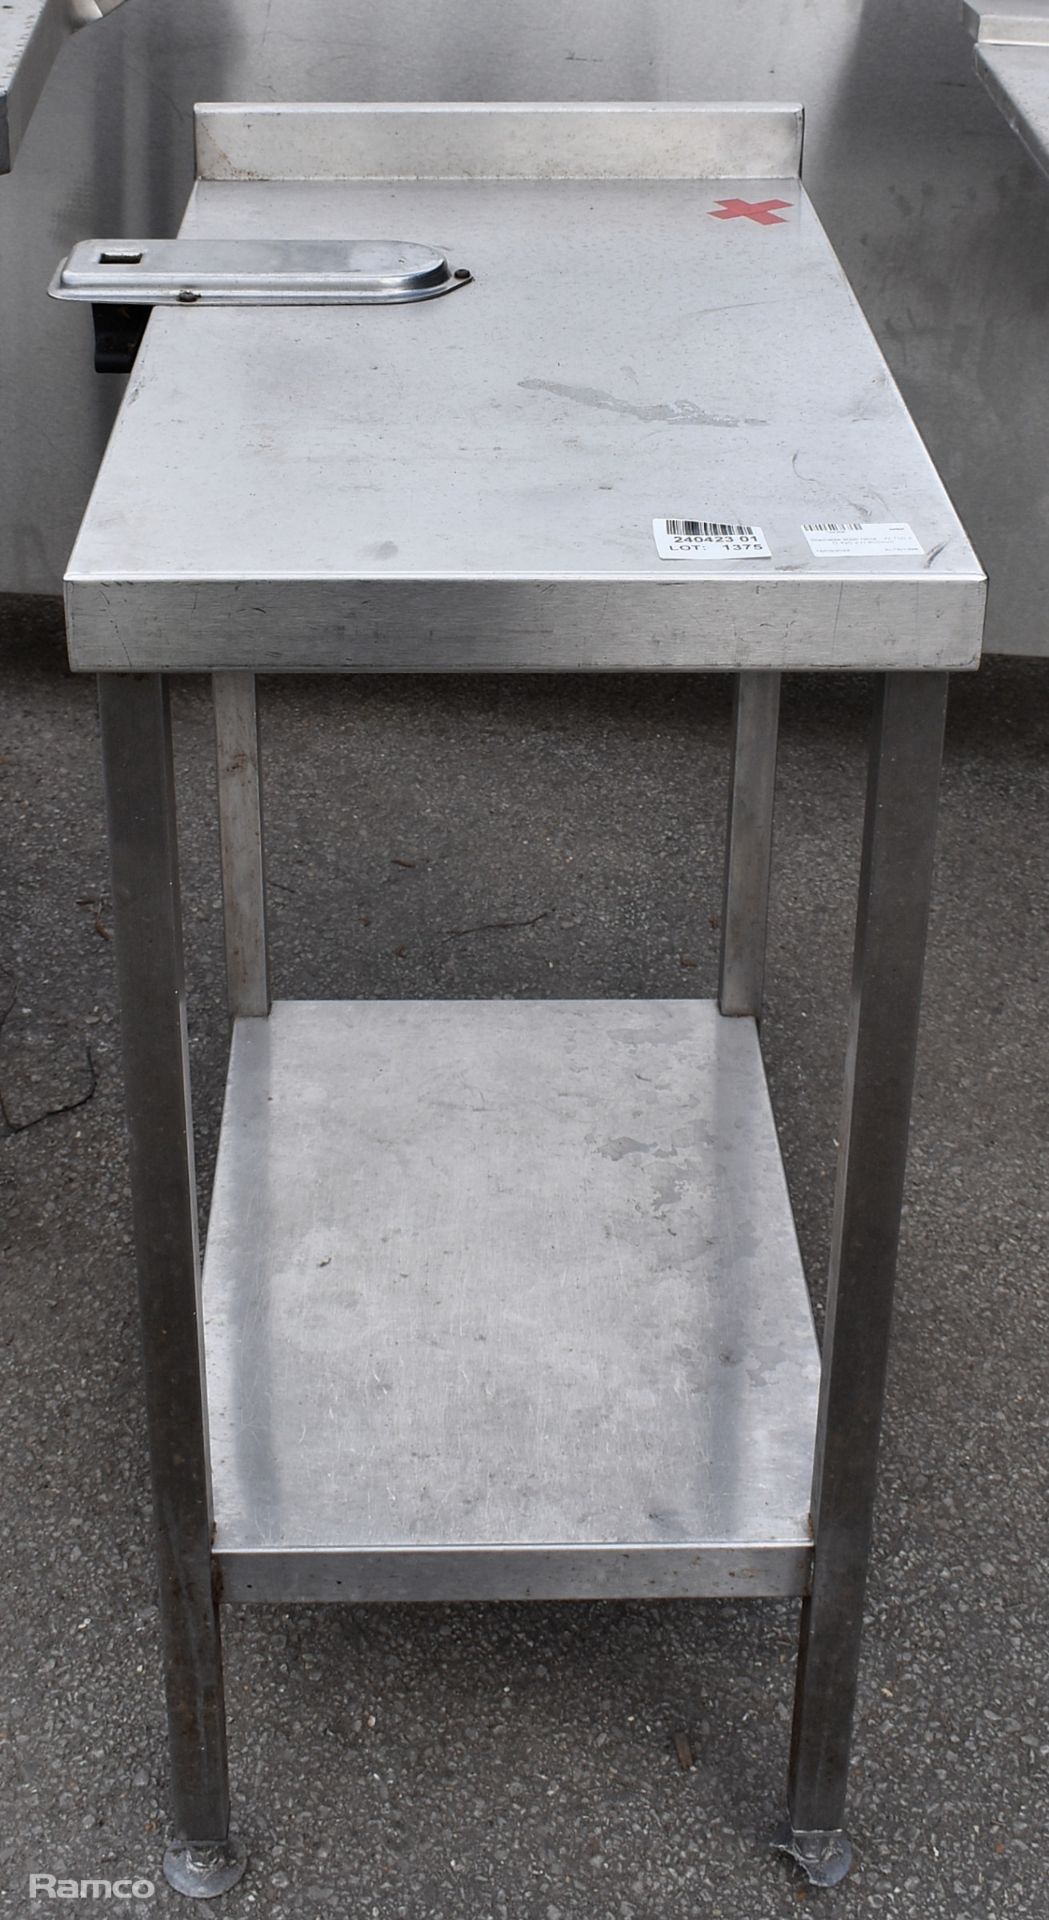 Stainless steel table - W 700 x D 420 x H 900mm - with can opener holder